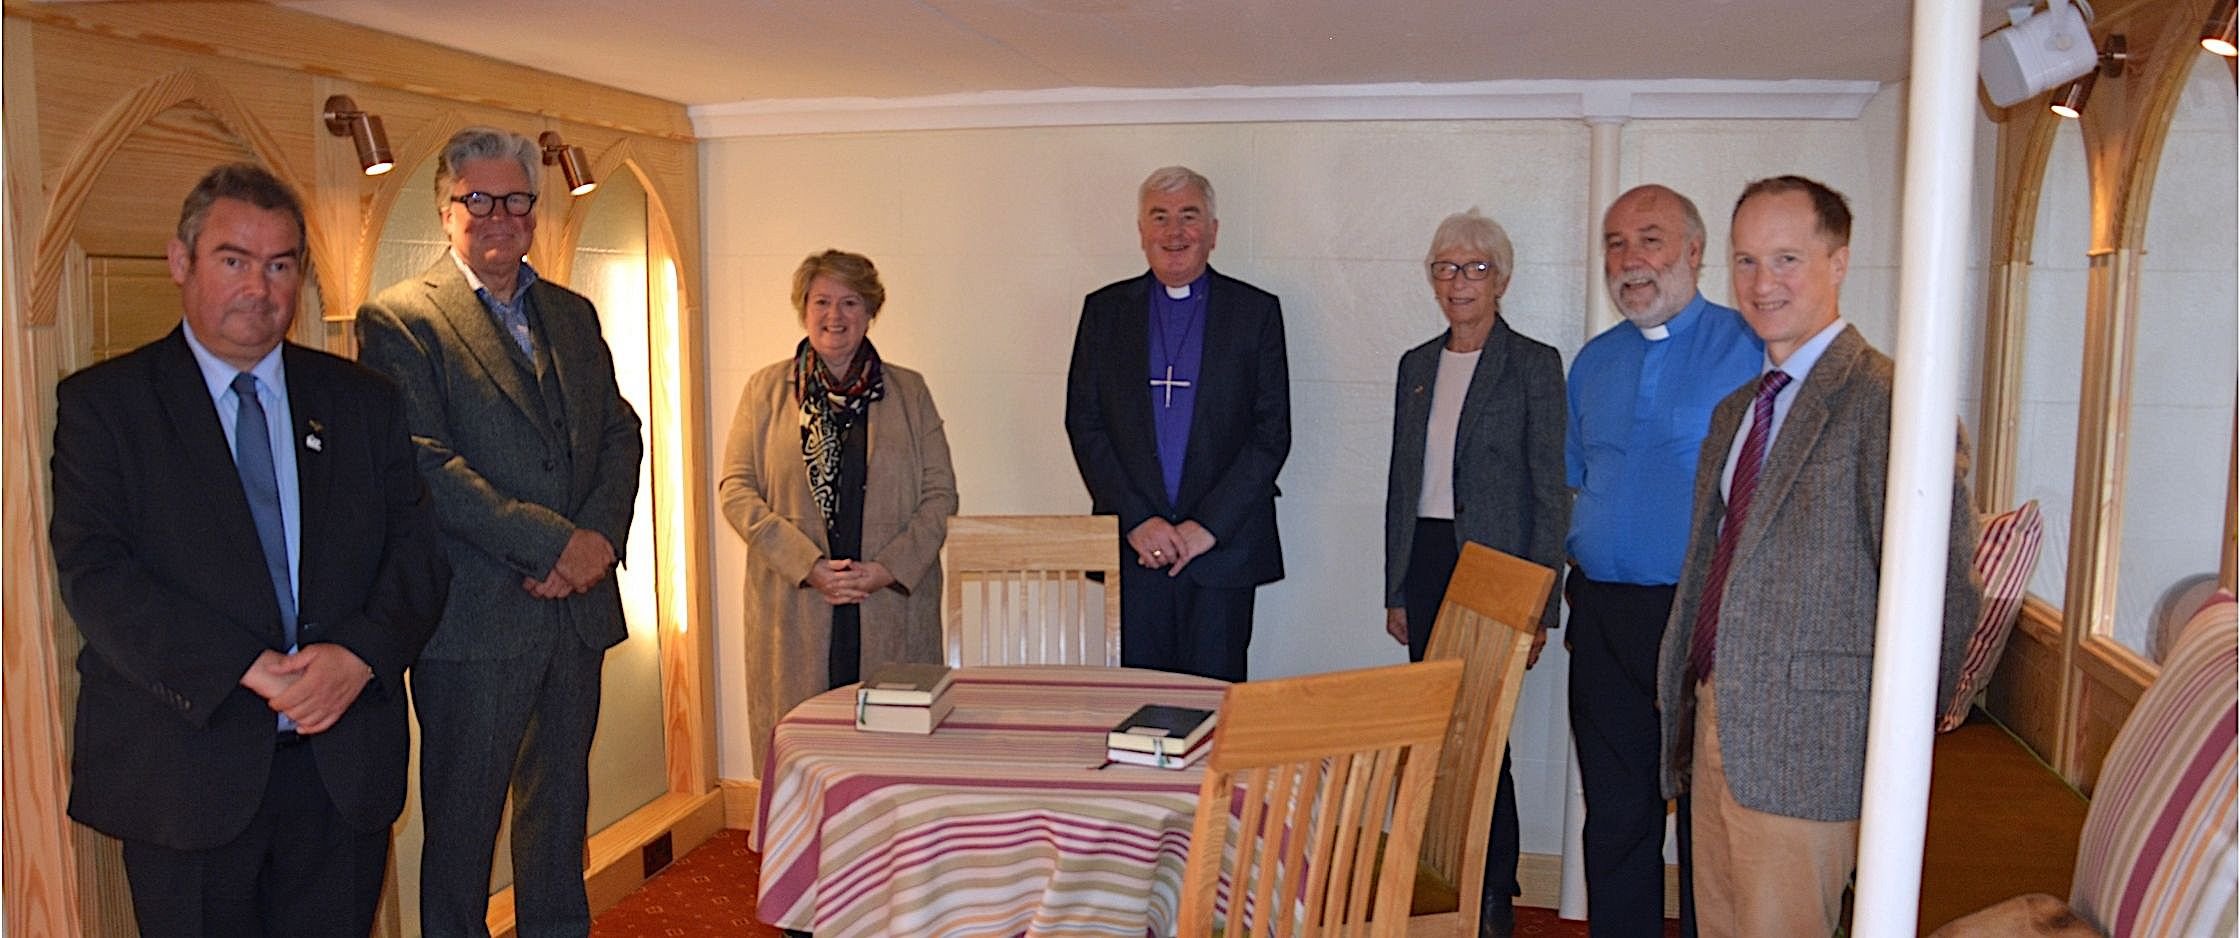 From left to right: Councillor Terry Andrews, Mr Warren Cannon, Ms Liz Baker, the Rt Revd David McClay, Mrs Patricia Cross, the Revd Stephen Smyth and Mr Stephen Cross.